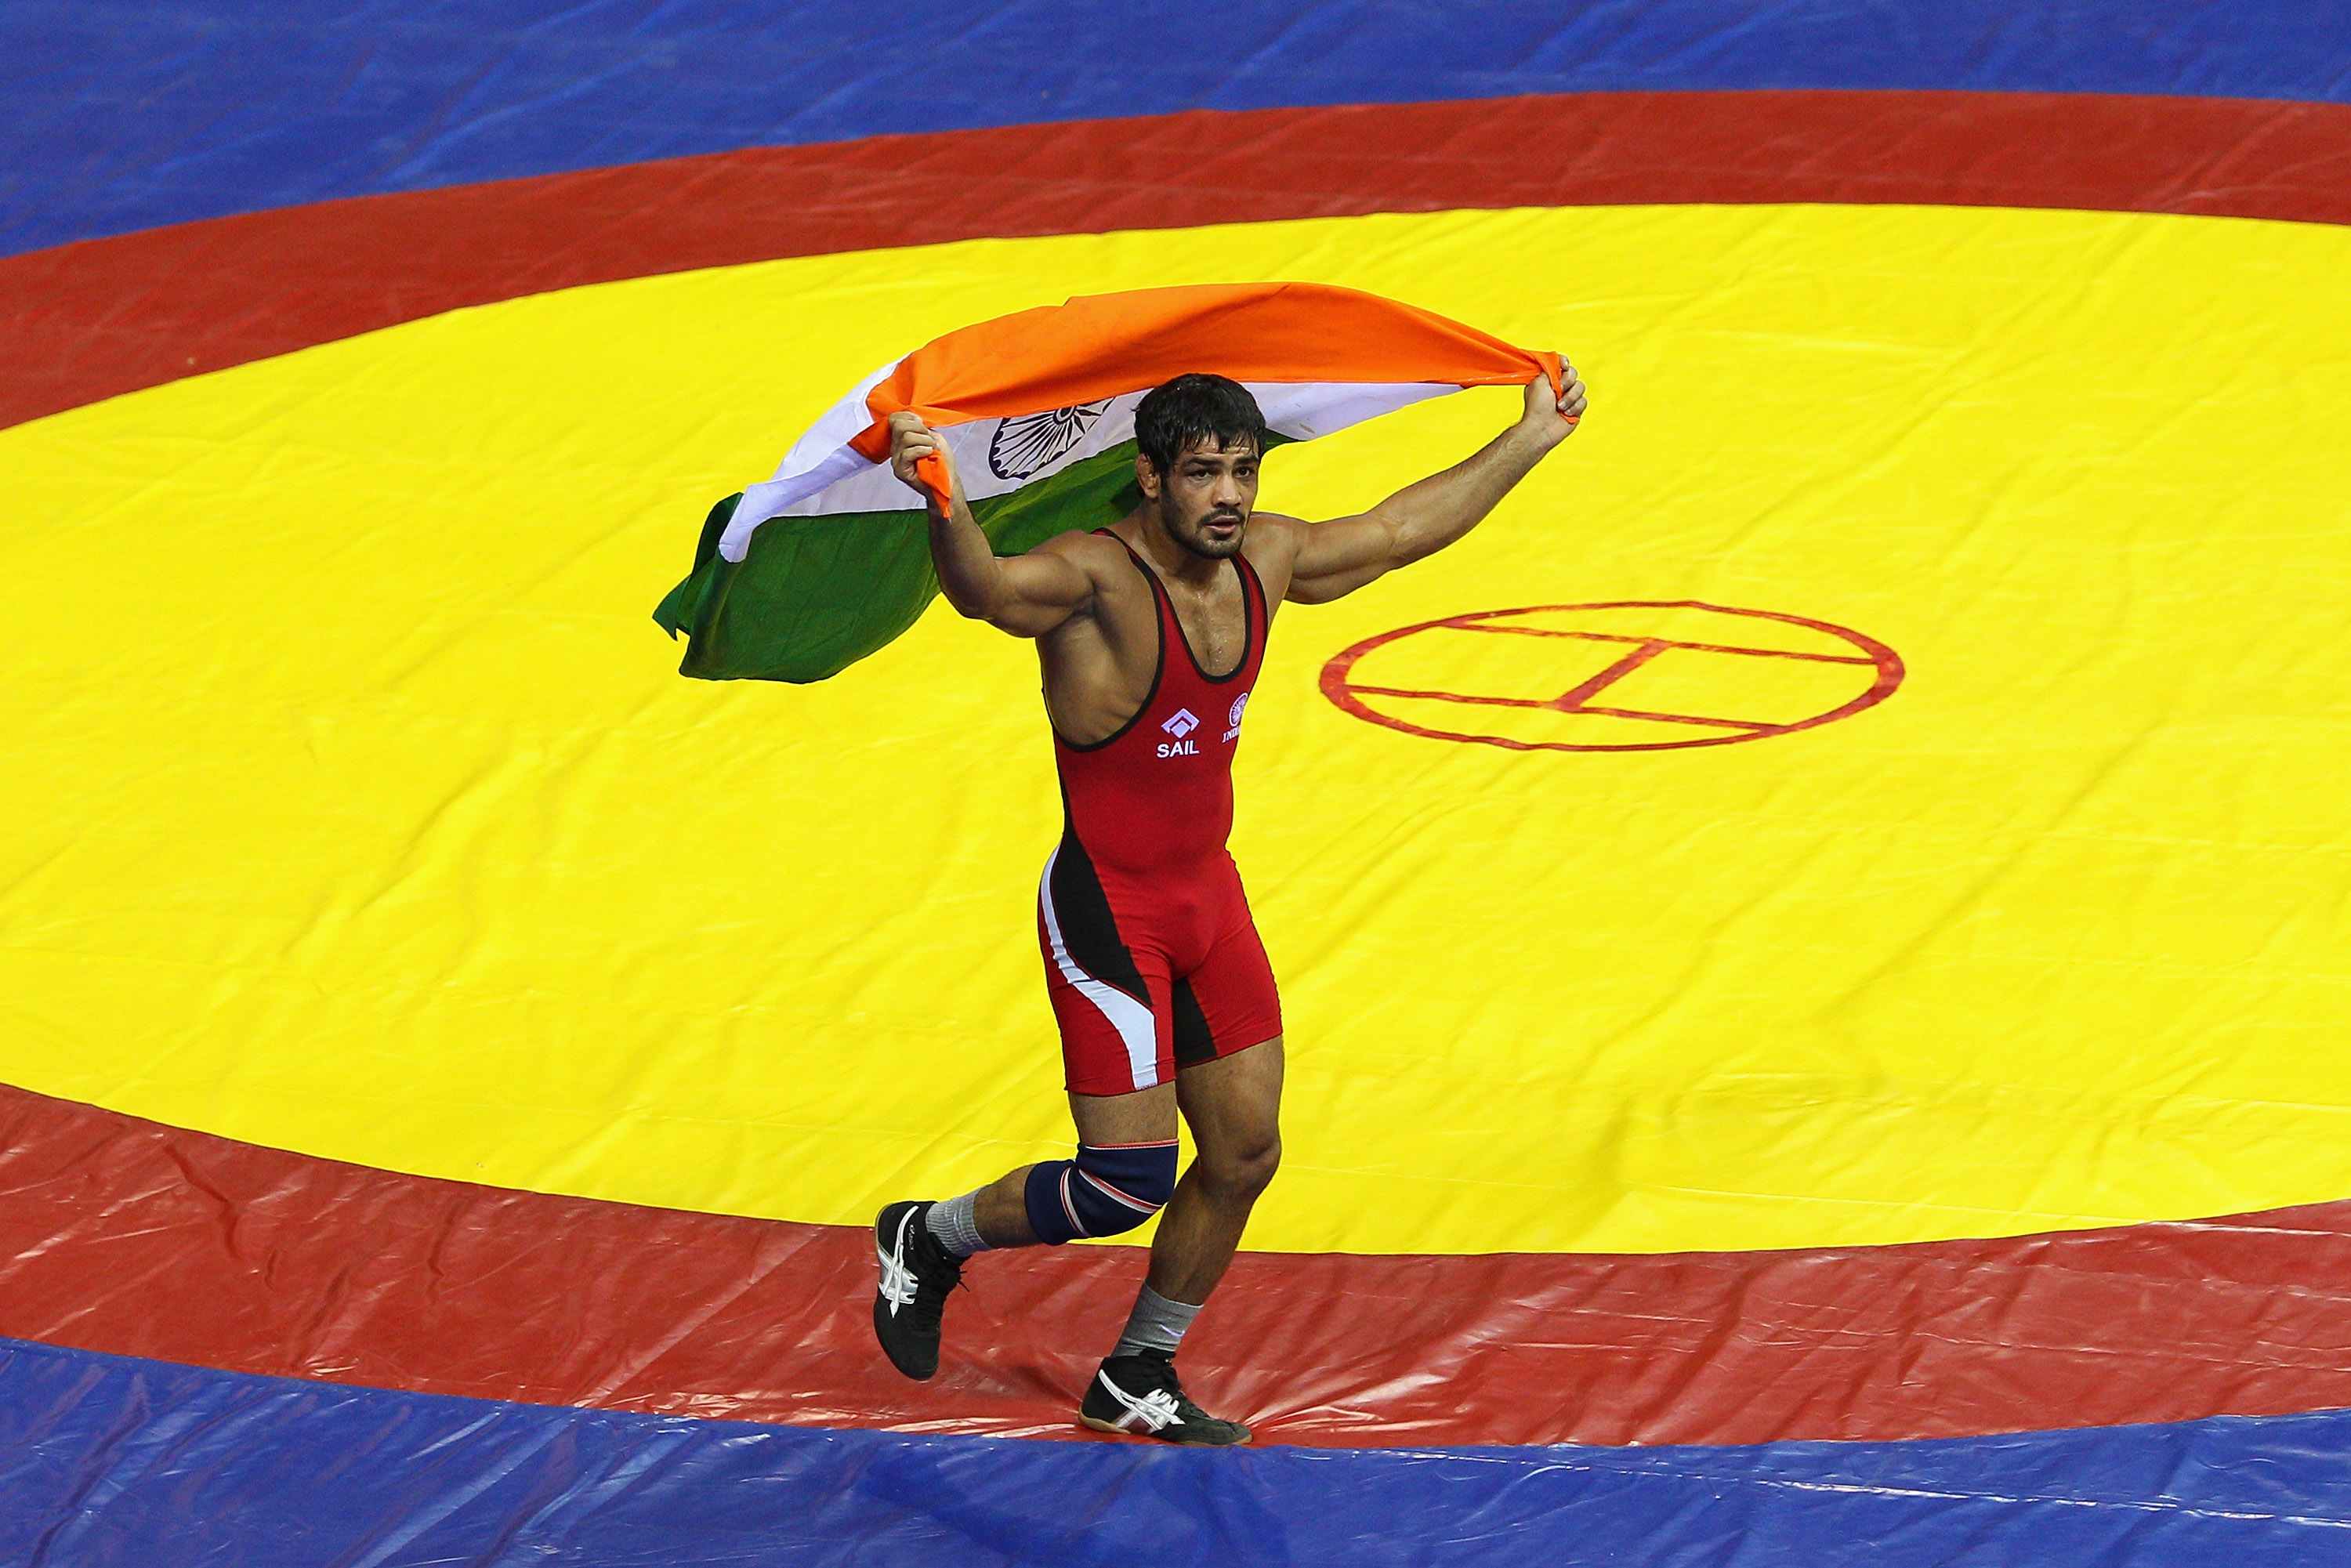 CWG 2018 | Sushil Kumar smashes Johannes Botha in a flash to win third Wrestling Gold medal